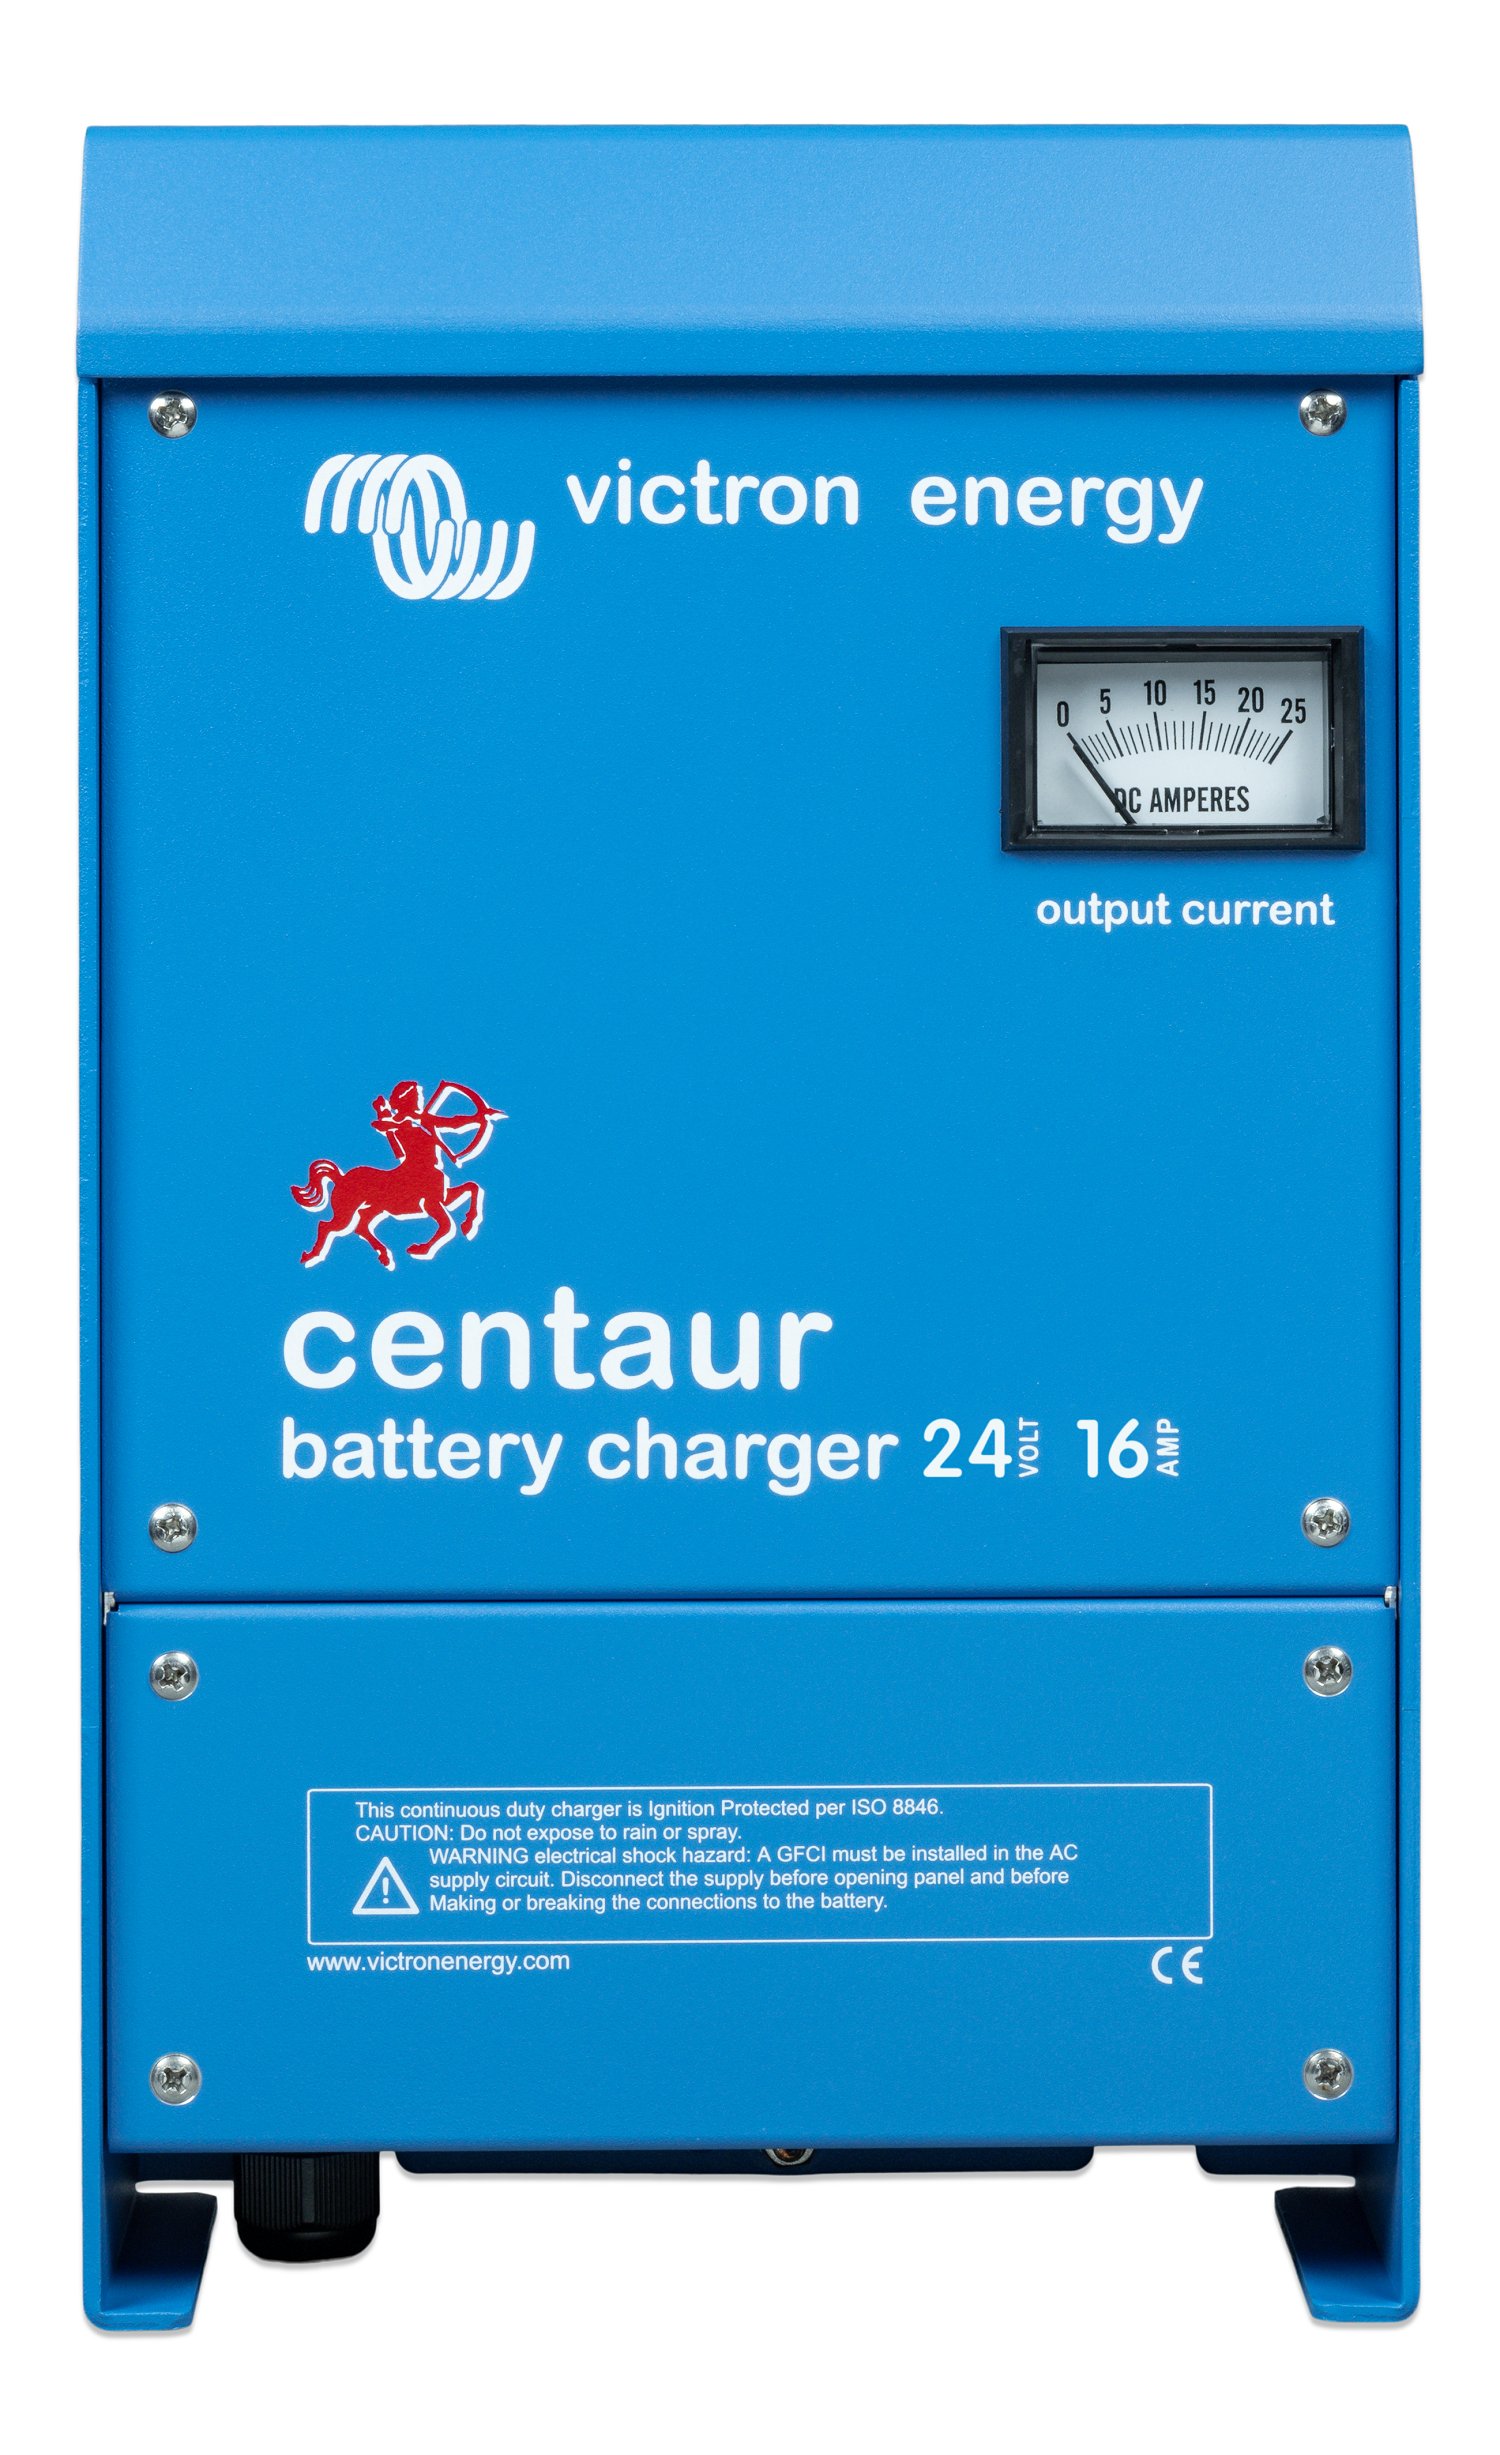 Can this Victron Centaur charger be used with 220 volt AC?